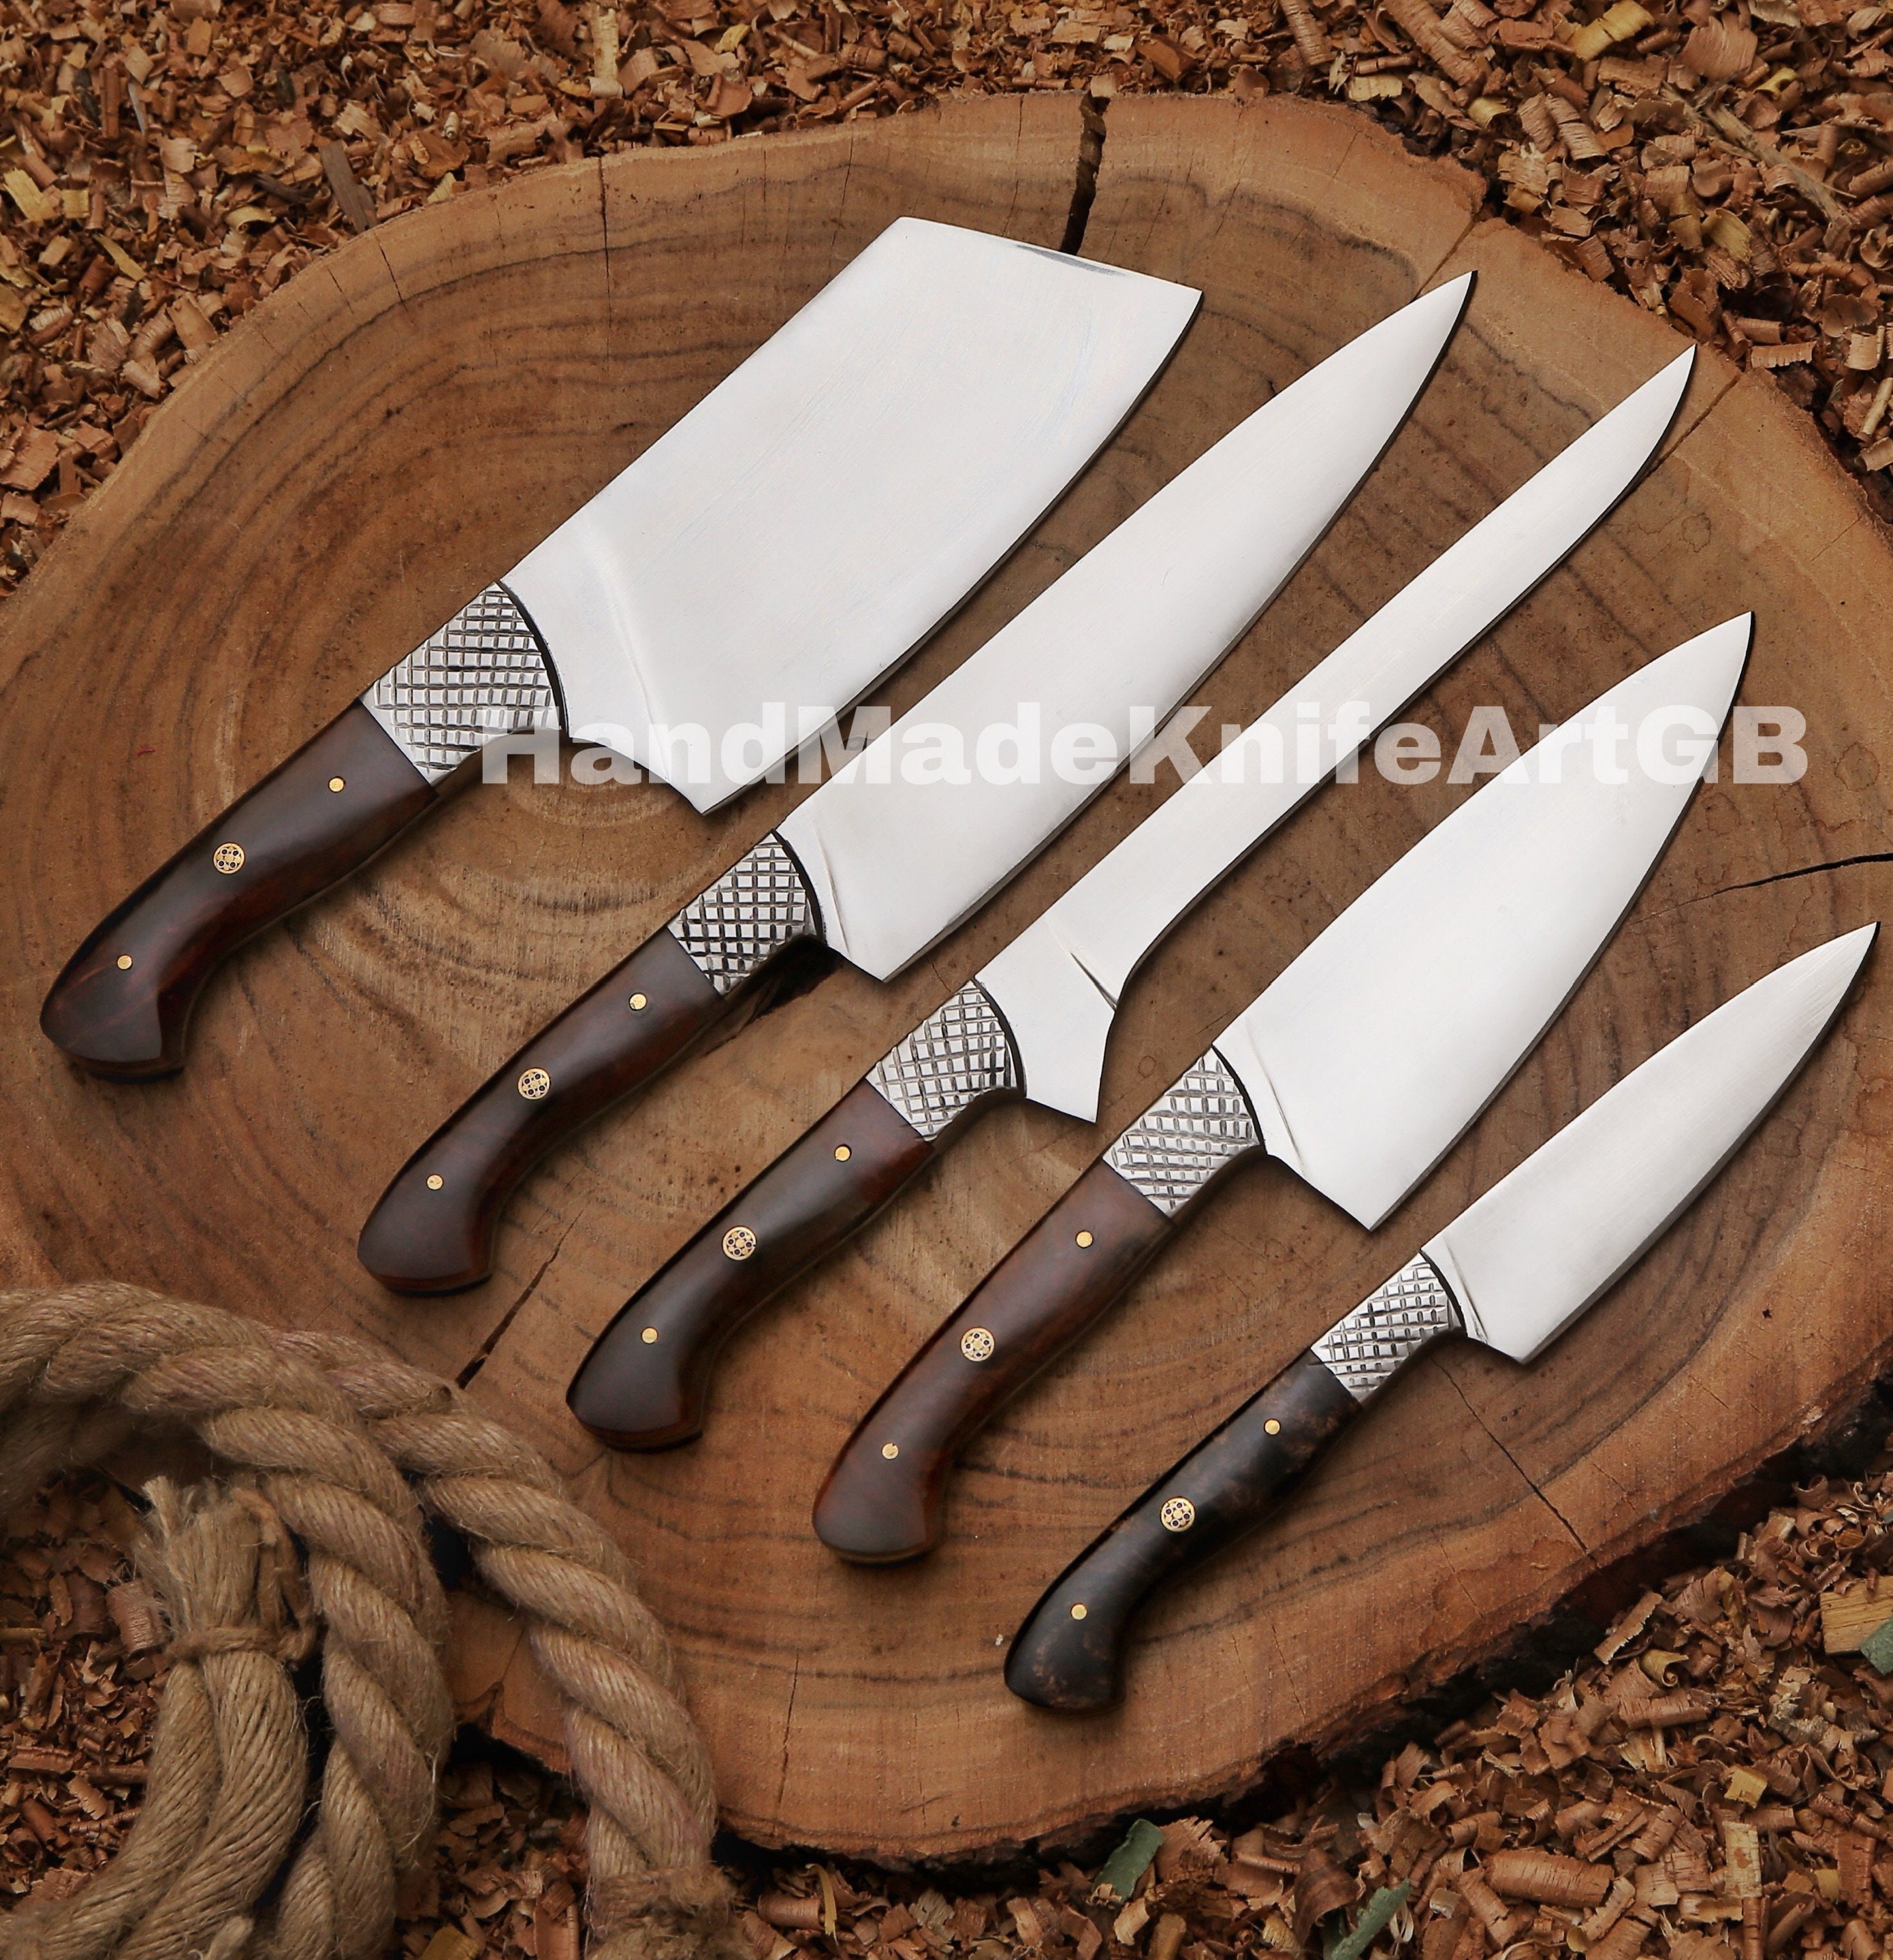 Kitchen Knife Set Stainless Steel Forged Hammered Damascus Japanese Chef Knives with Gift Box,Ergonomic Resin Handle Meat Cleaver Knife Fishbone